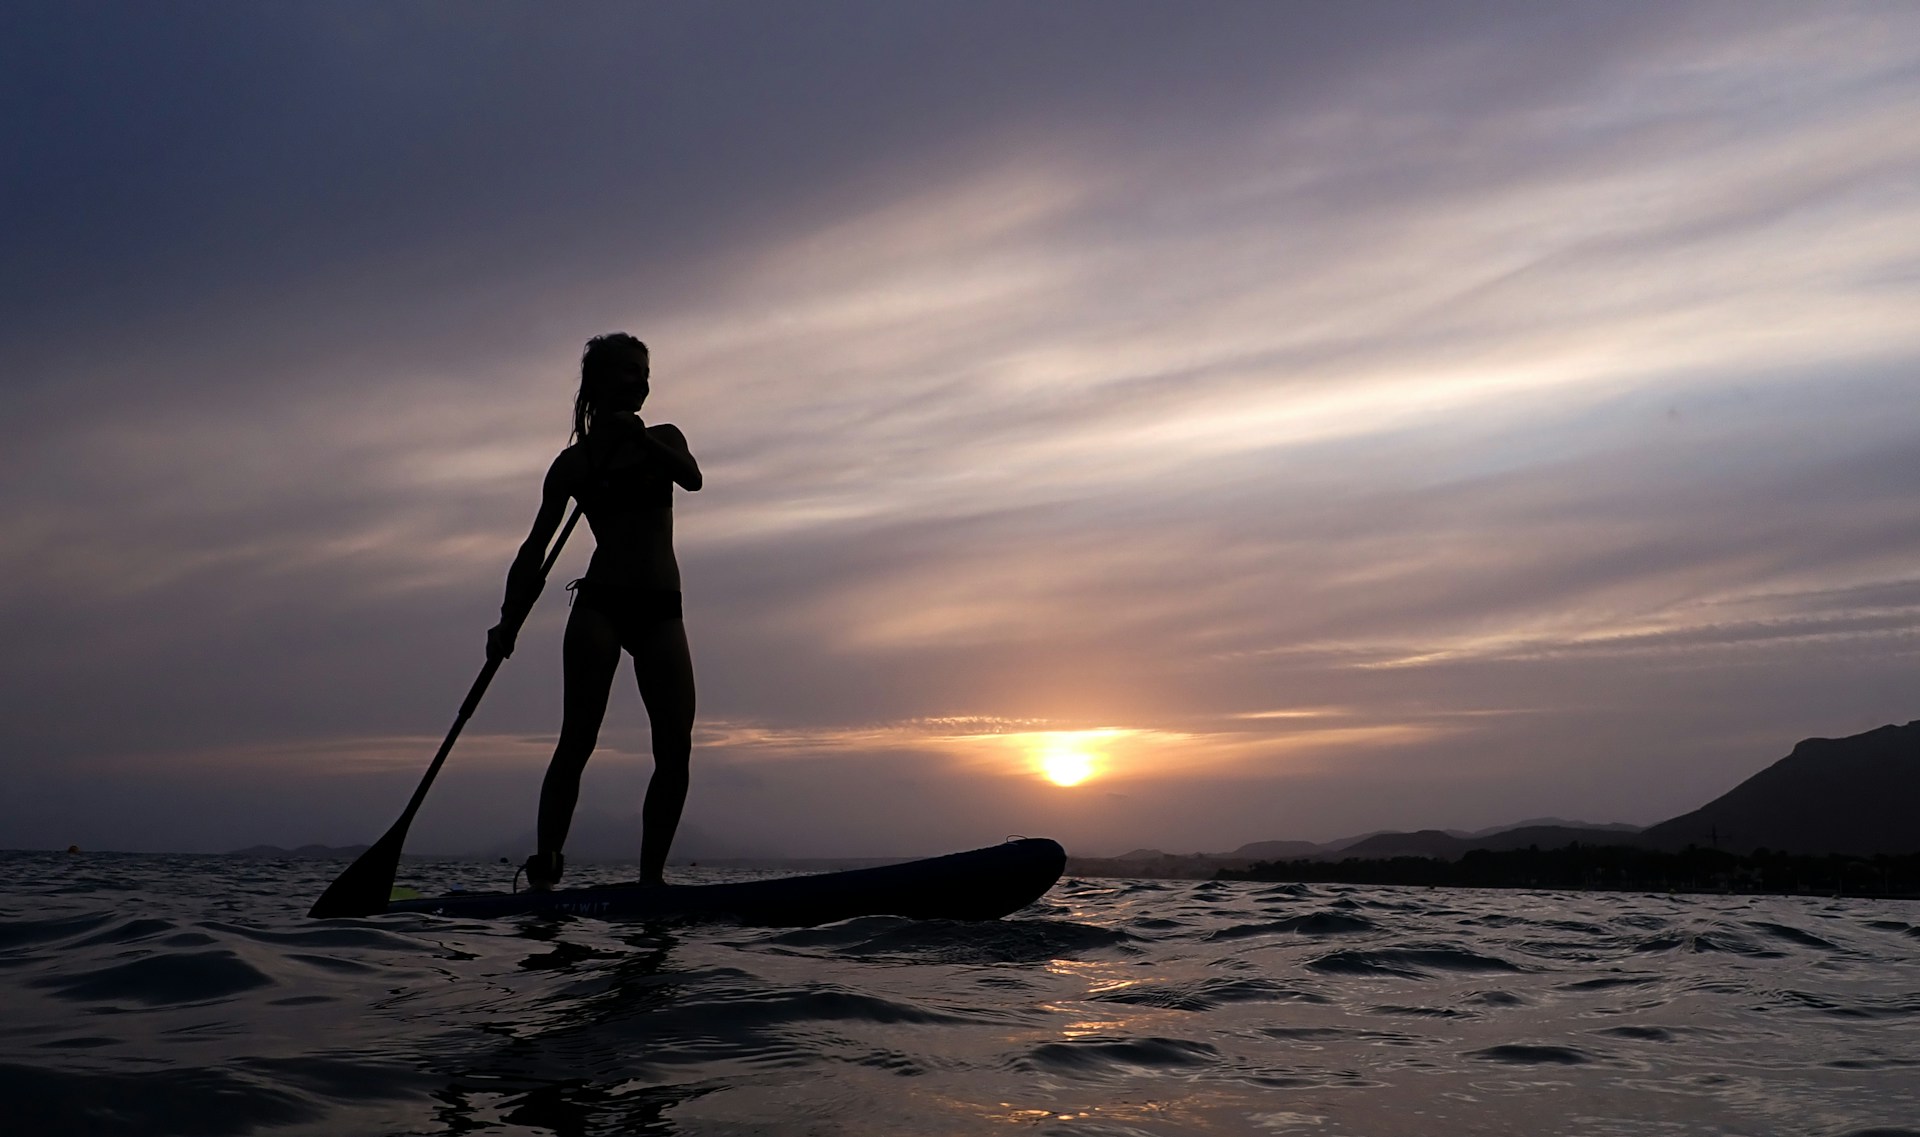 photo - a woman addle boarding in the ocean suring sunset 